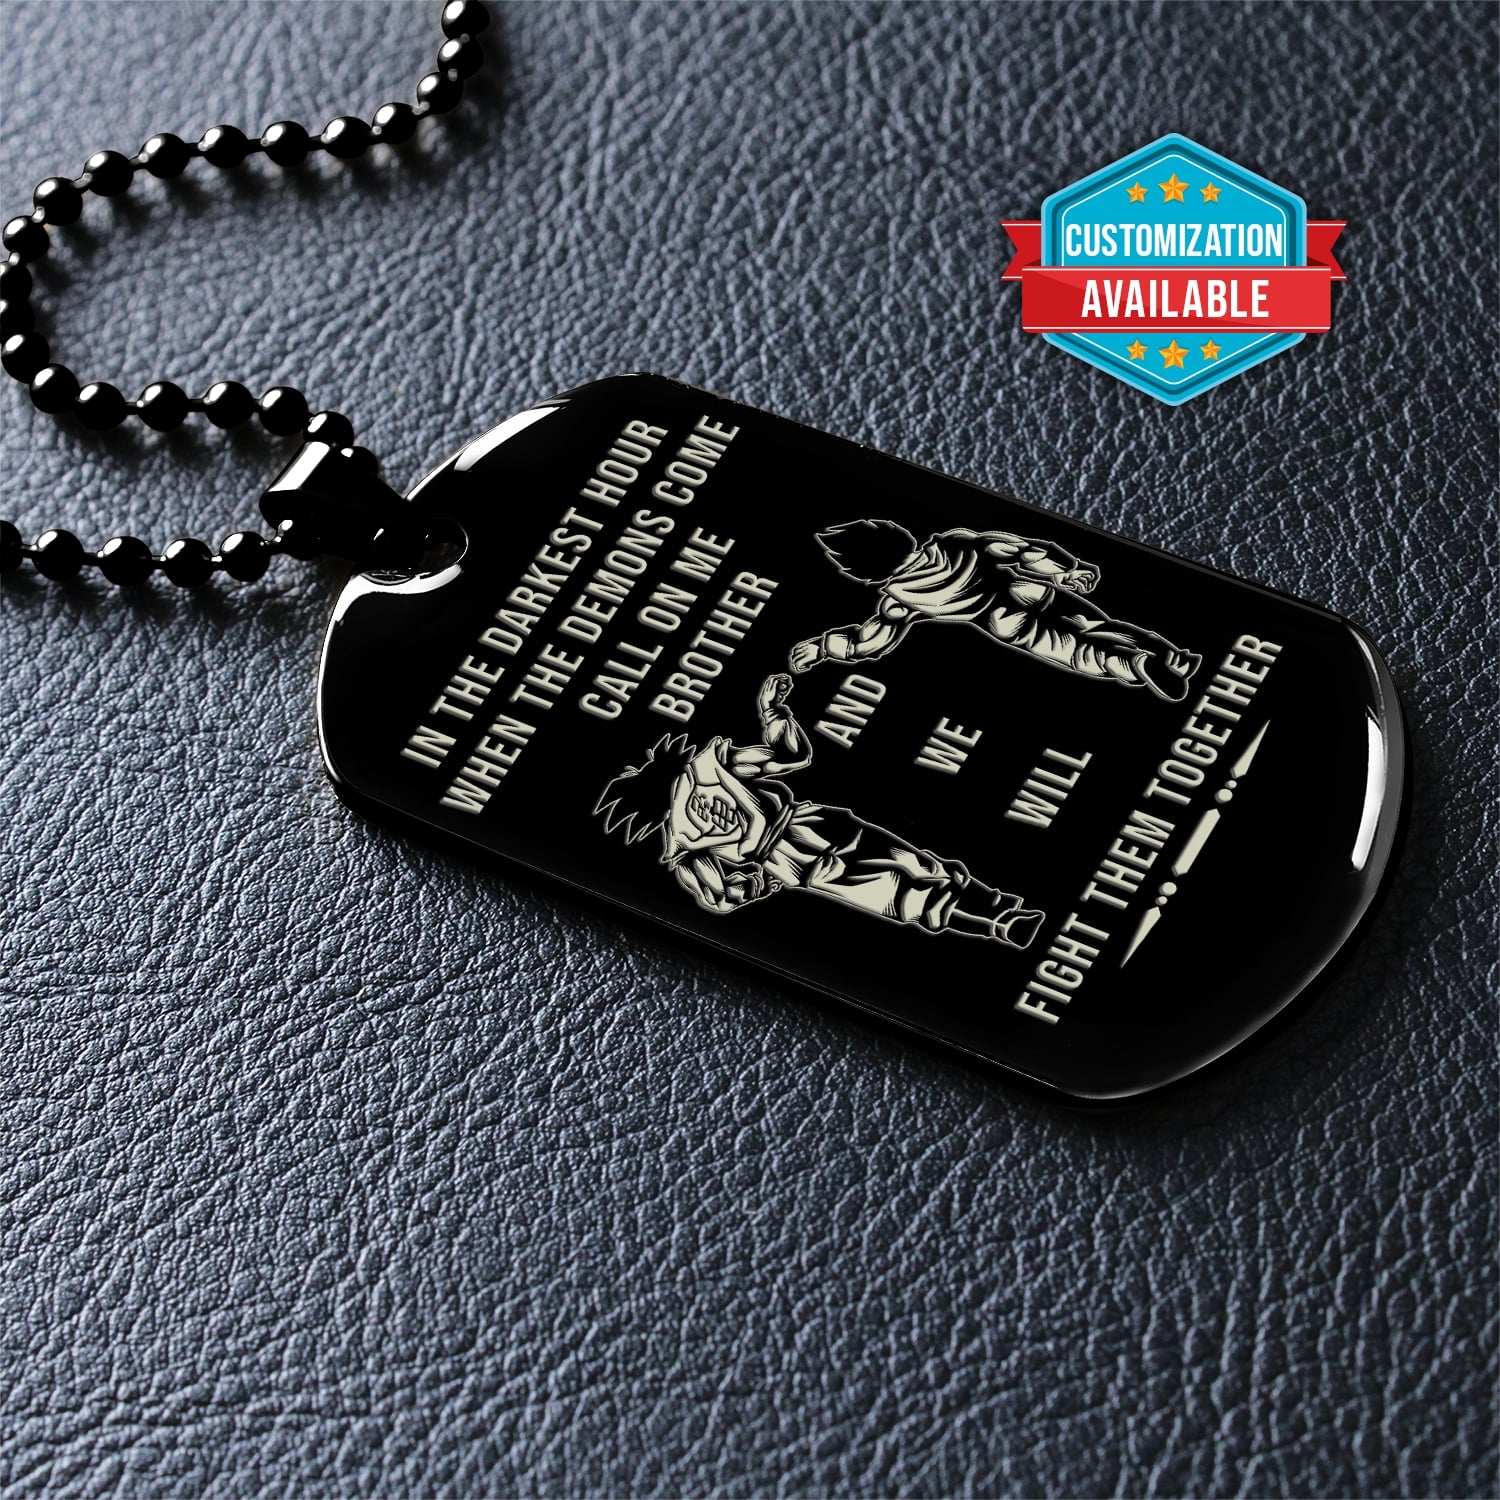 DRD055 - Call On Me Brother - It's About Being Better Than You Were The Day Before - Goku - Vegeta - Dragon Ball Dog Tag -  Black Double-Sided Engrave Dog Tag